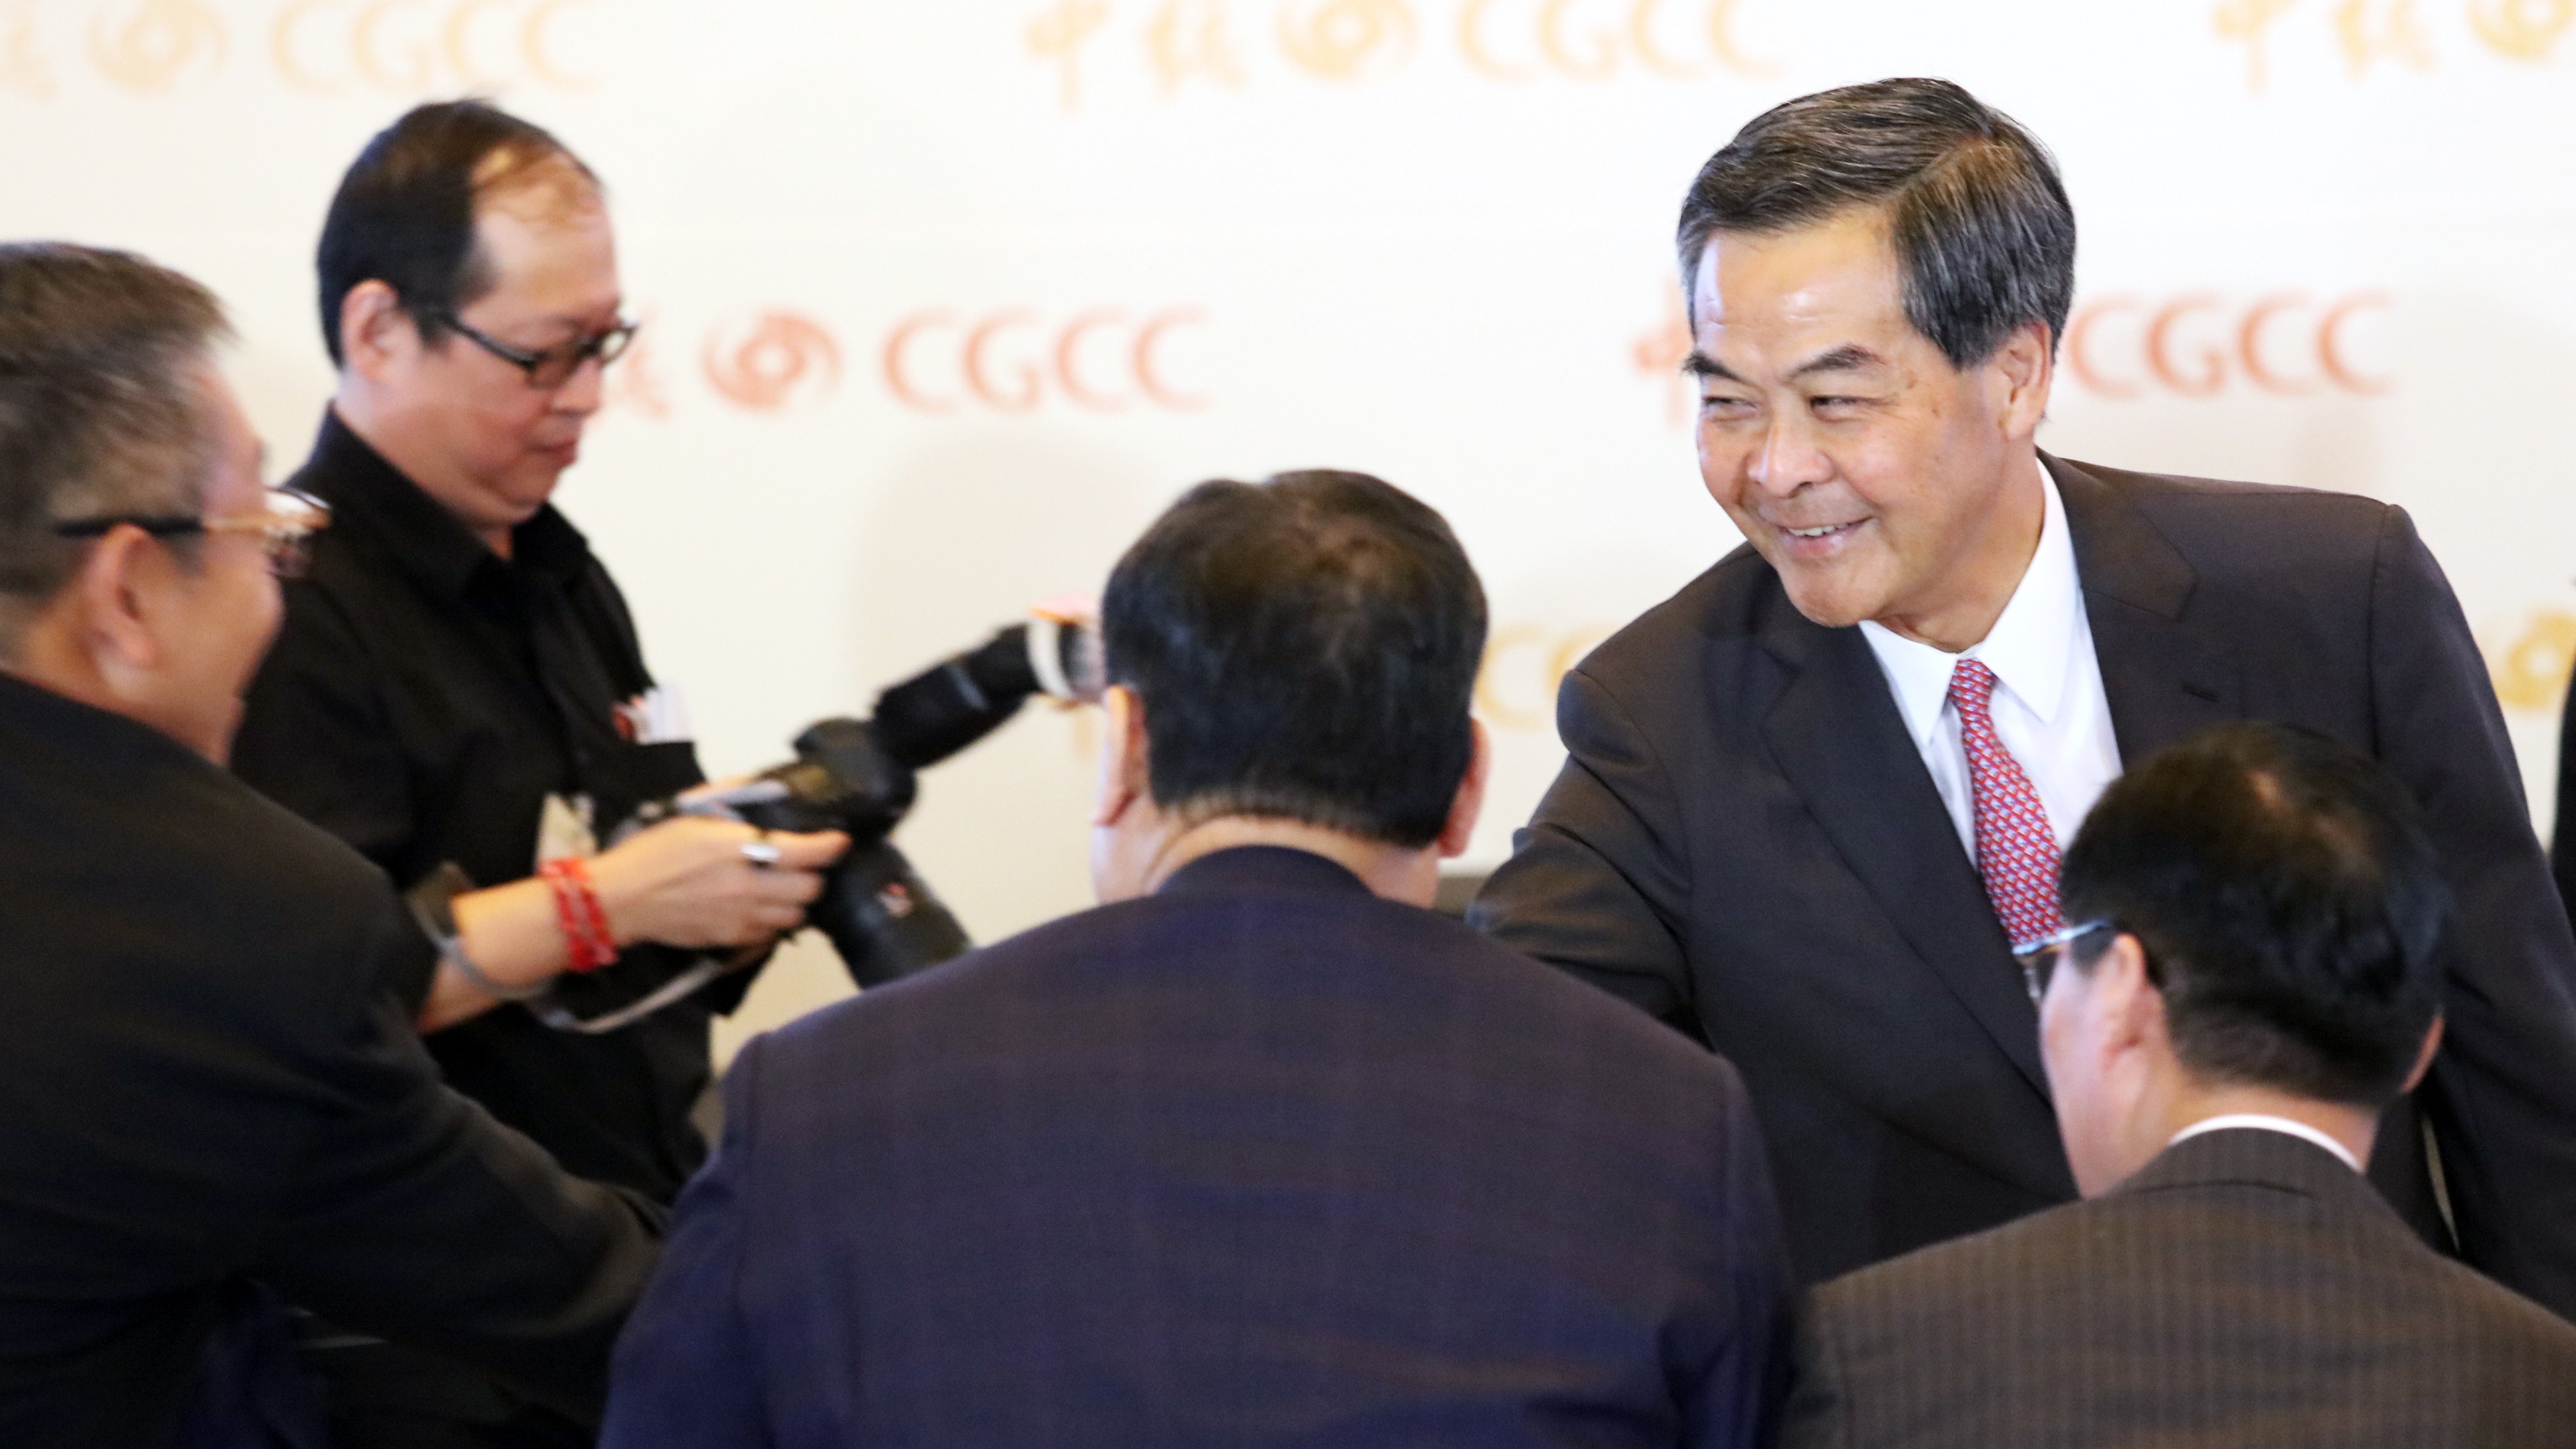 Former chief executive Leung Chun-ying, the vice-chairman of the Chinese People’s Political Consultative Conference, exhorted Hong Kong’s advisers to Beijing to do more youth outreach and strengthen society’s love for China. Photo: Felix Wong